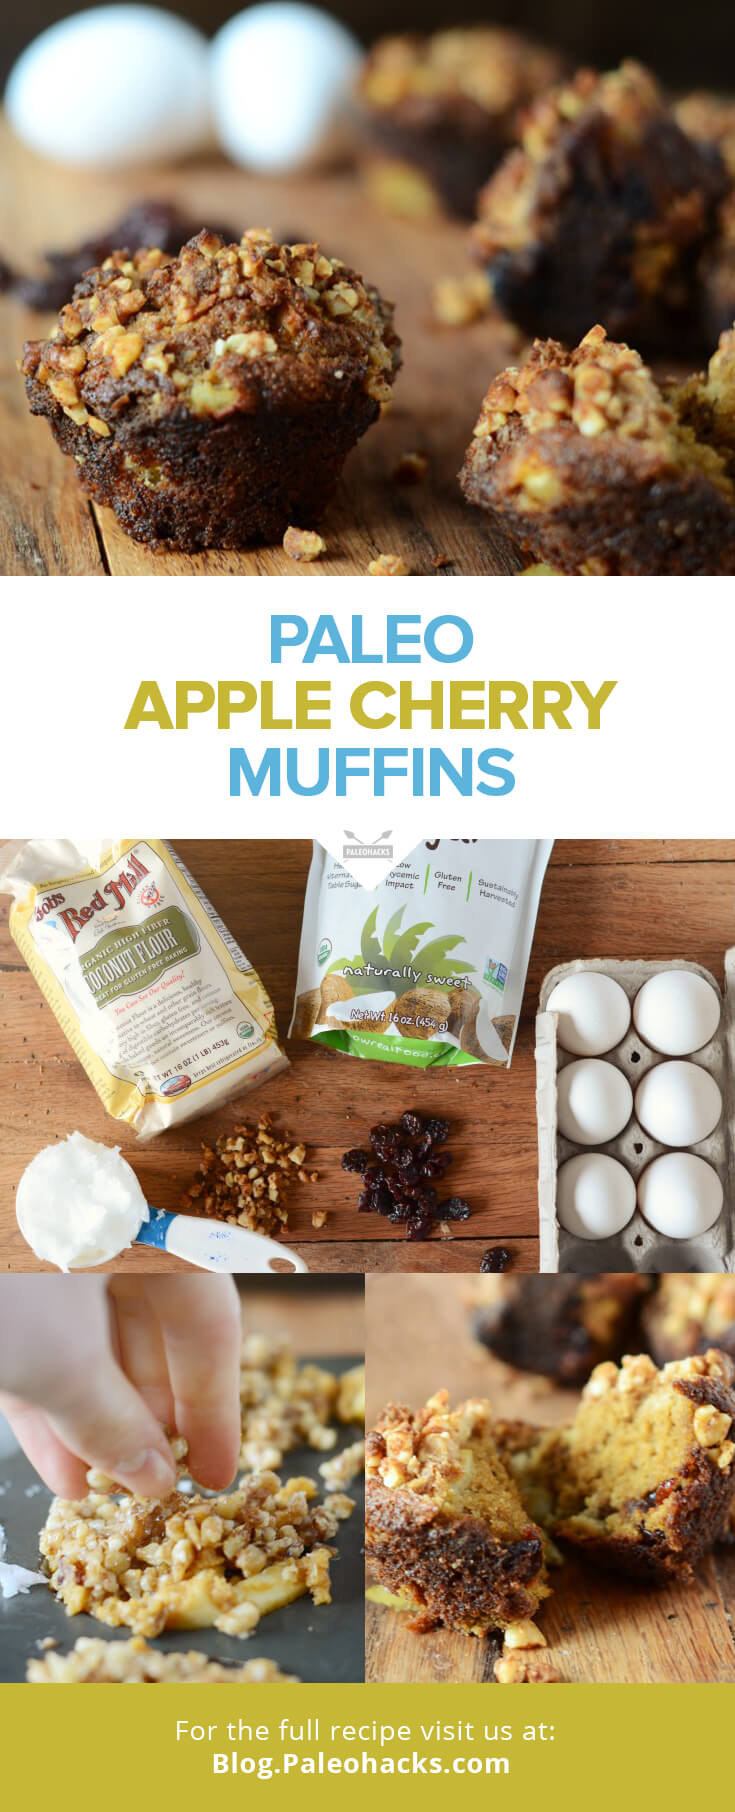 There’s nothing like fluffy and soft Paleo apple cherry muffins! Especially when paired with hot tea or a cup of organic coffee - it really can’t be beat!